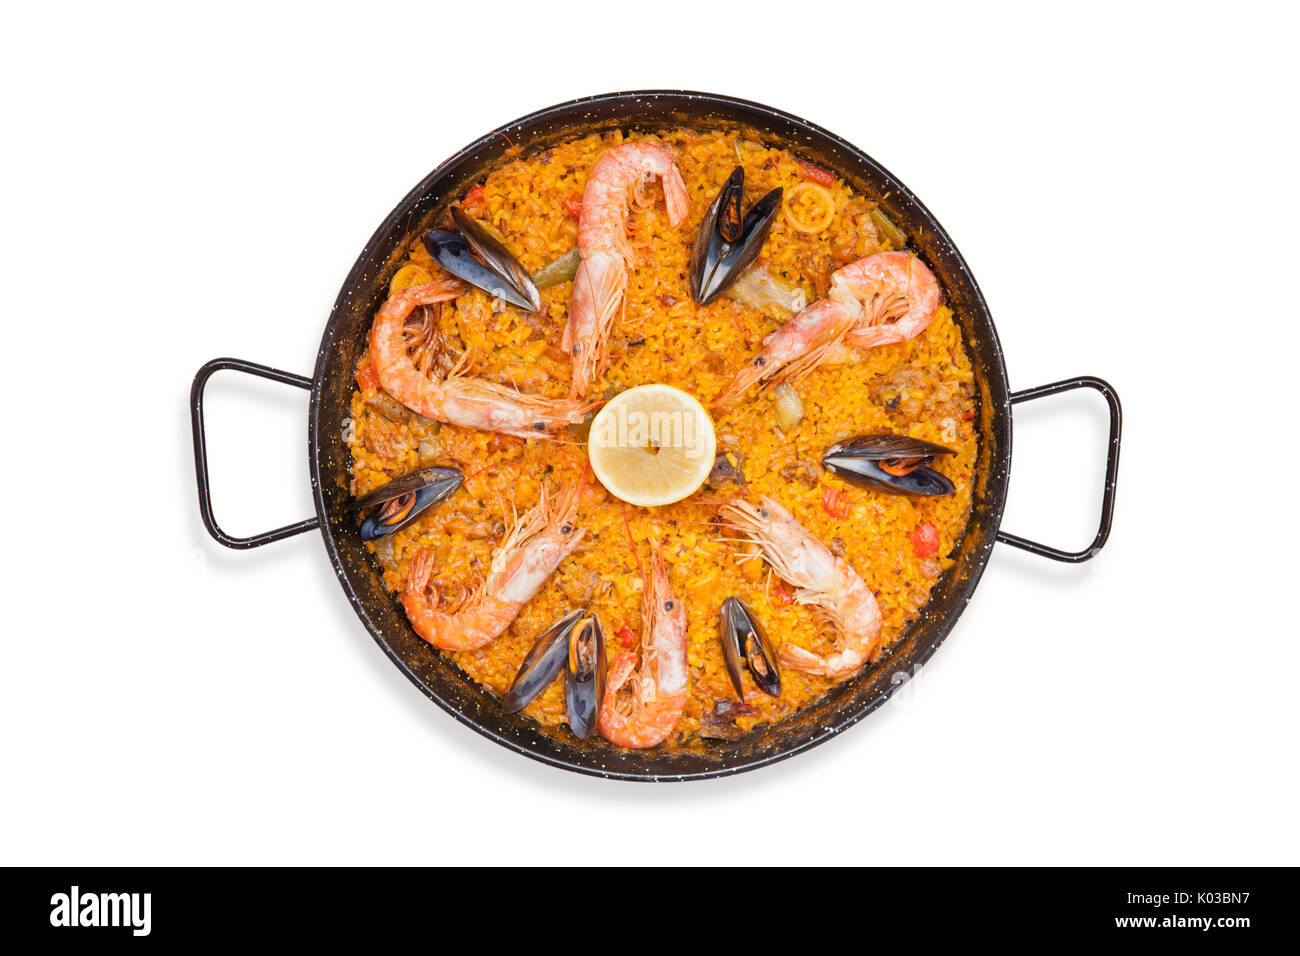 Top view of a typical spanish food, a paella Valenciana with rice, fish and vegetables Stock Photo